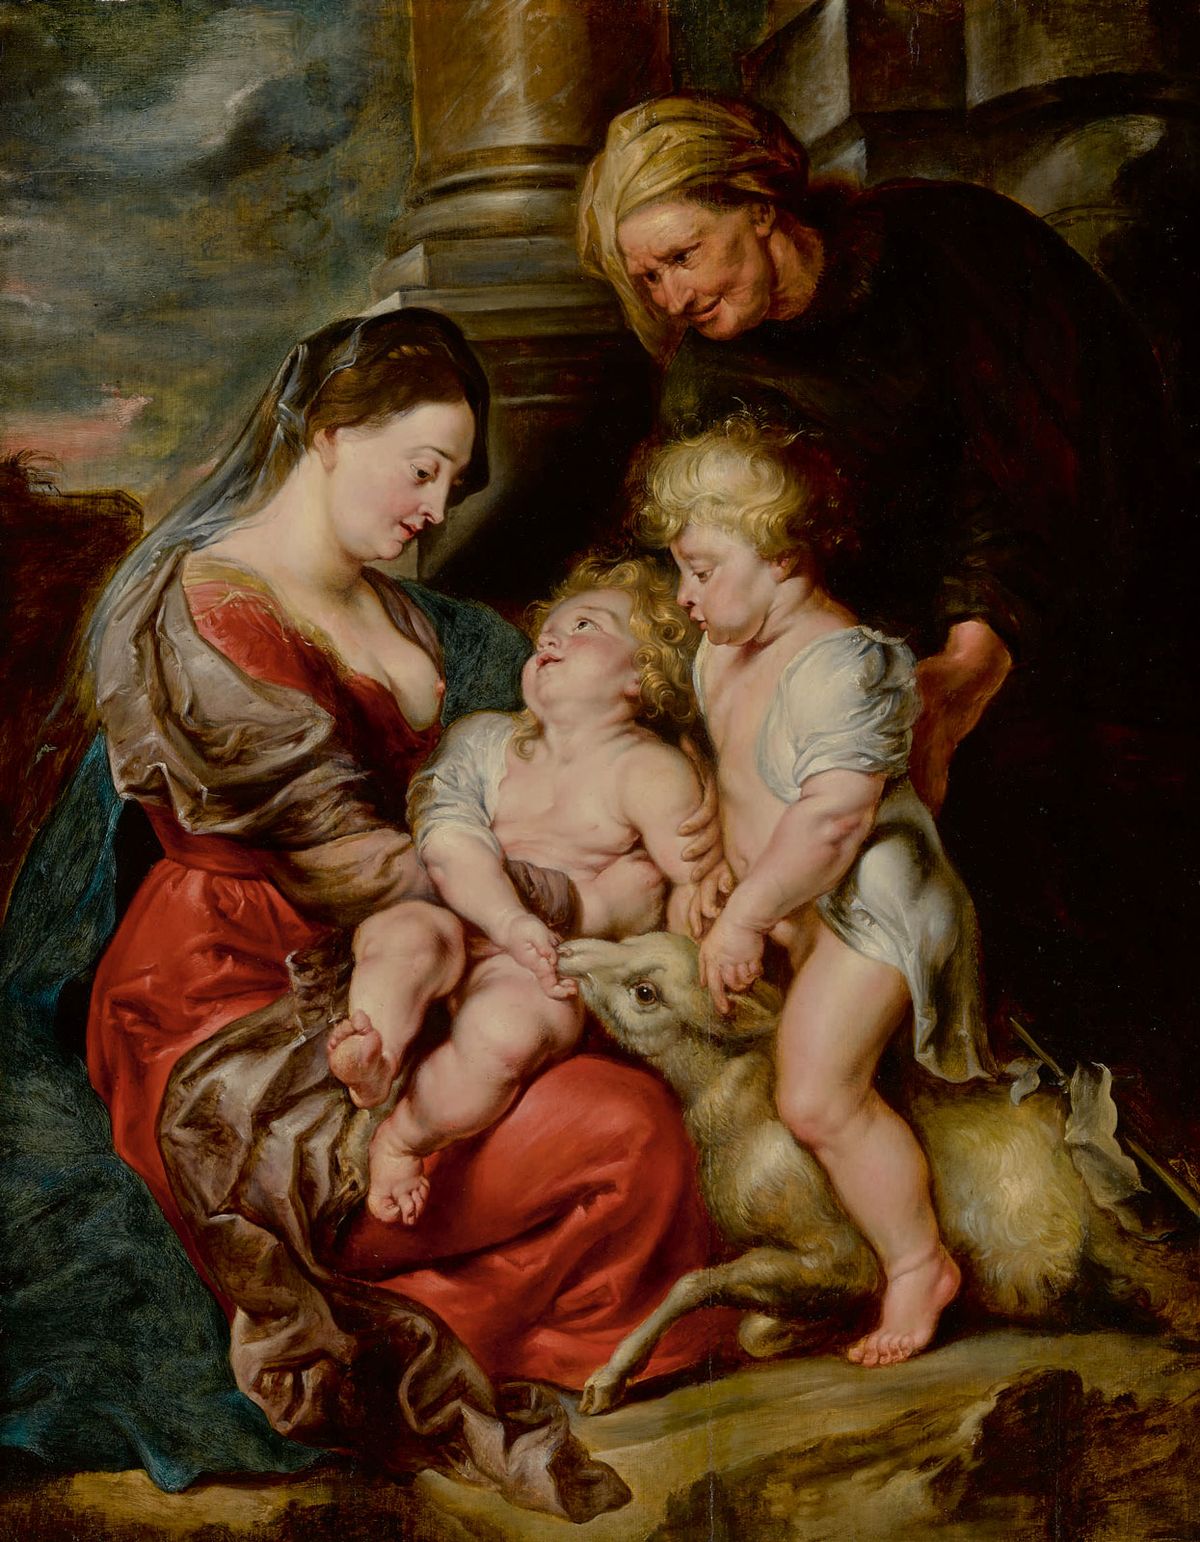 The Virgin and Christ Child, With Saints Elizabeth and John the Baptist by Peter Paul Rubens has not been seen in public since 1951 Image: courtesy of Sotheby’s